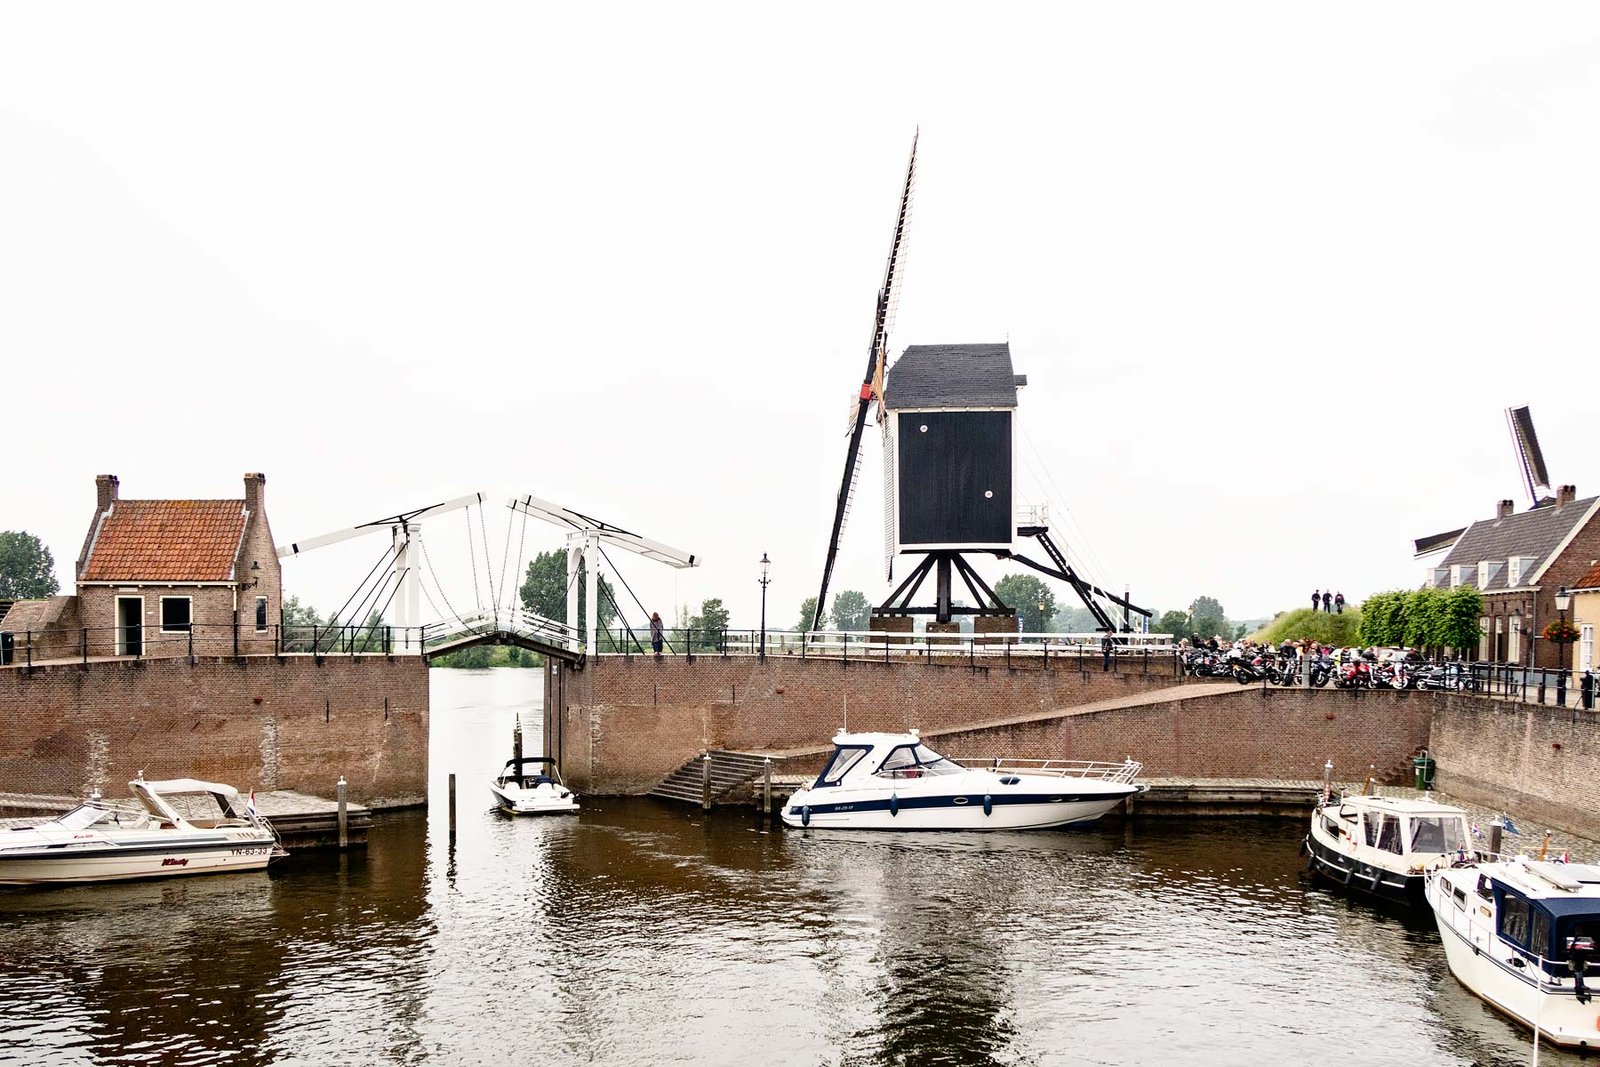 10 Things You Don’t Want to Miss When You Visit Brabant